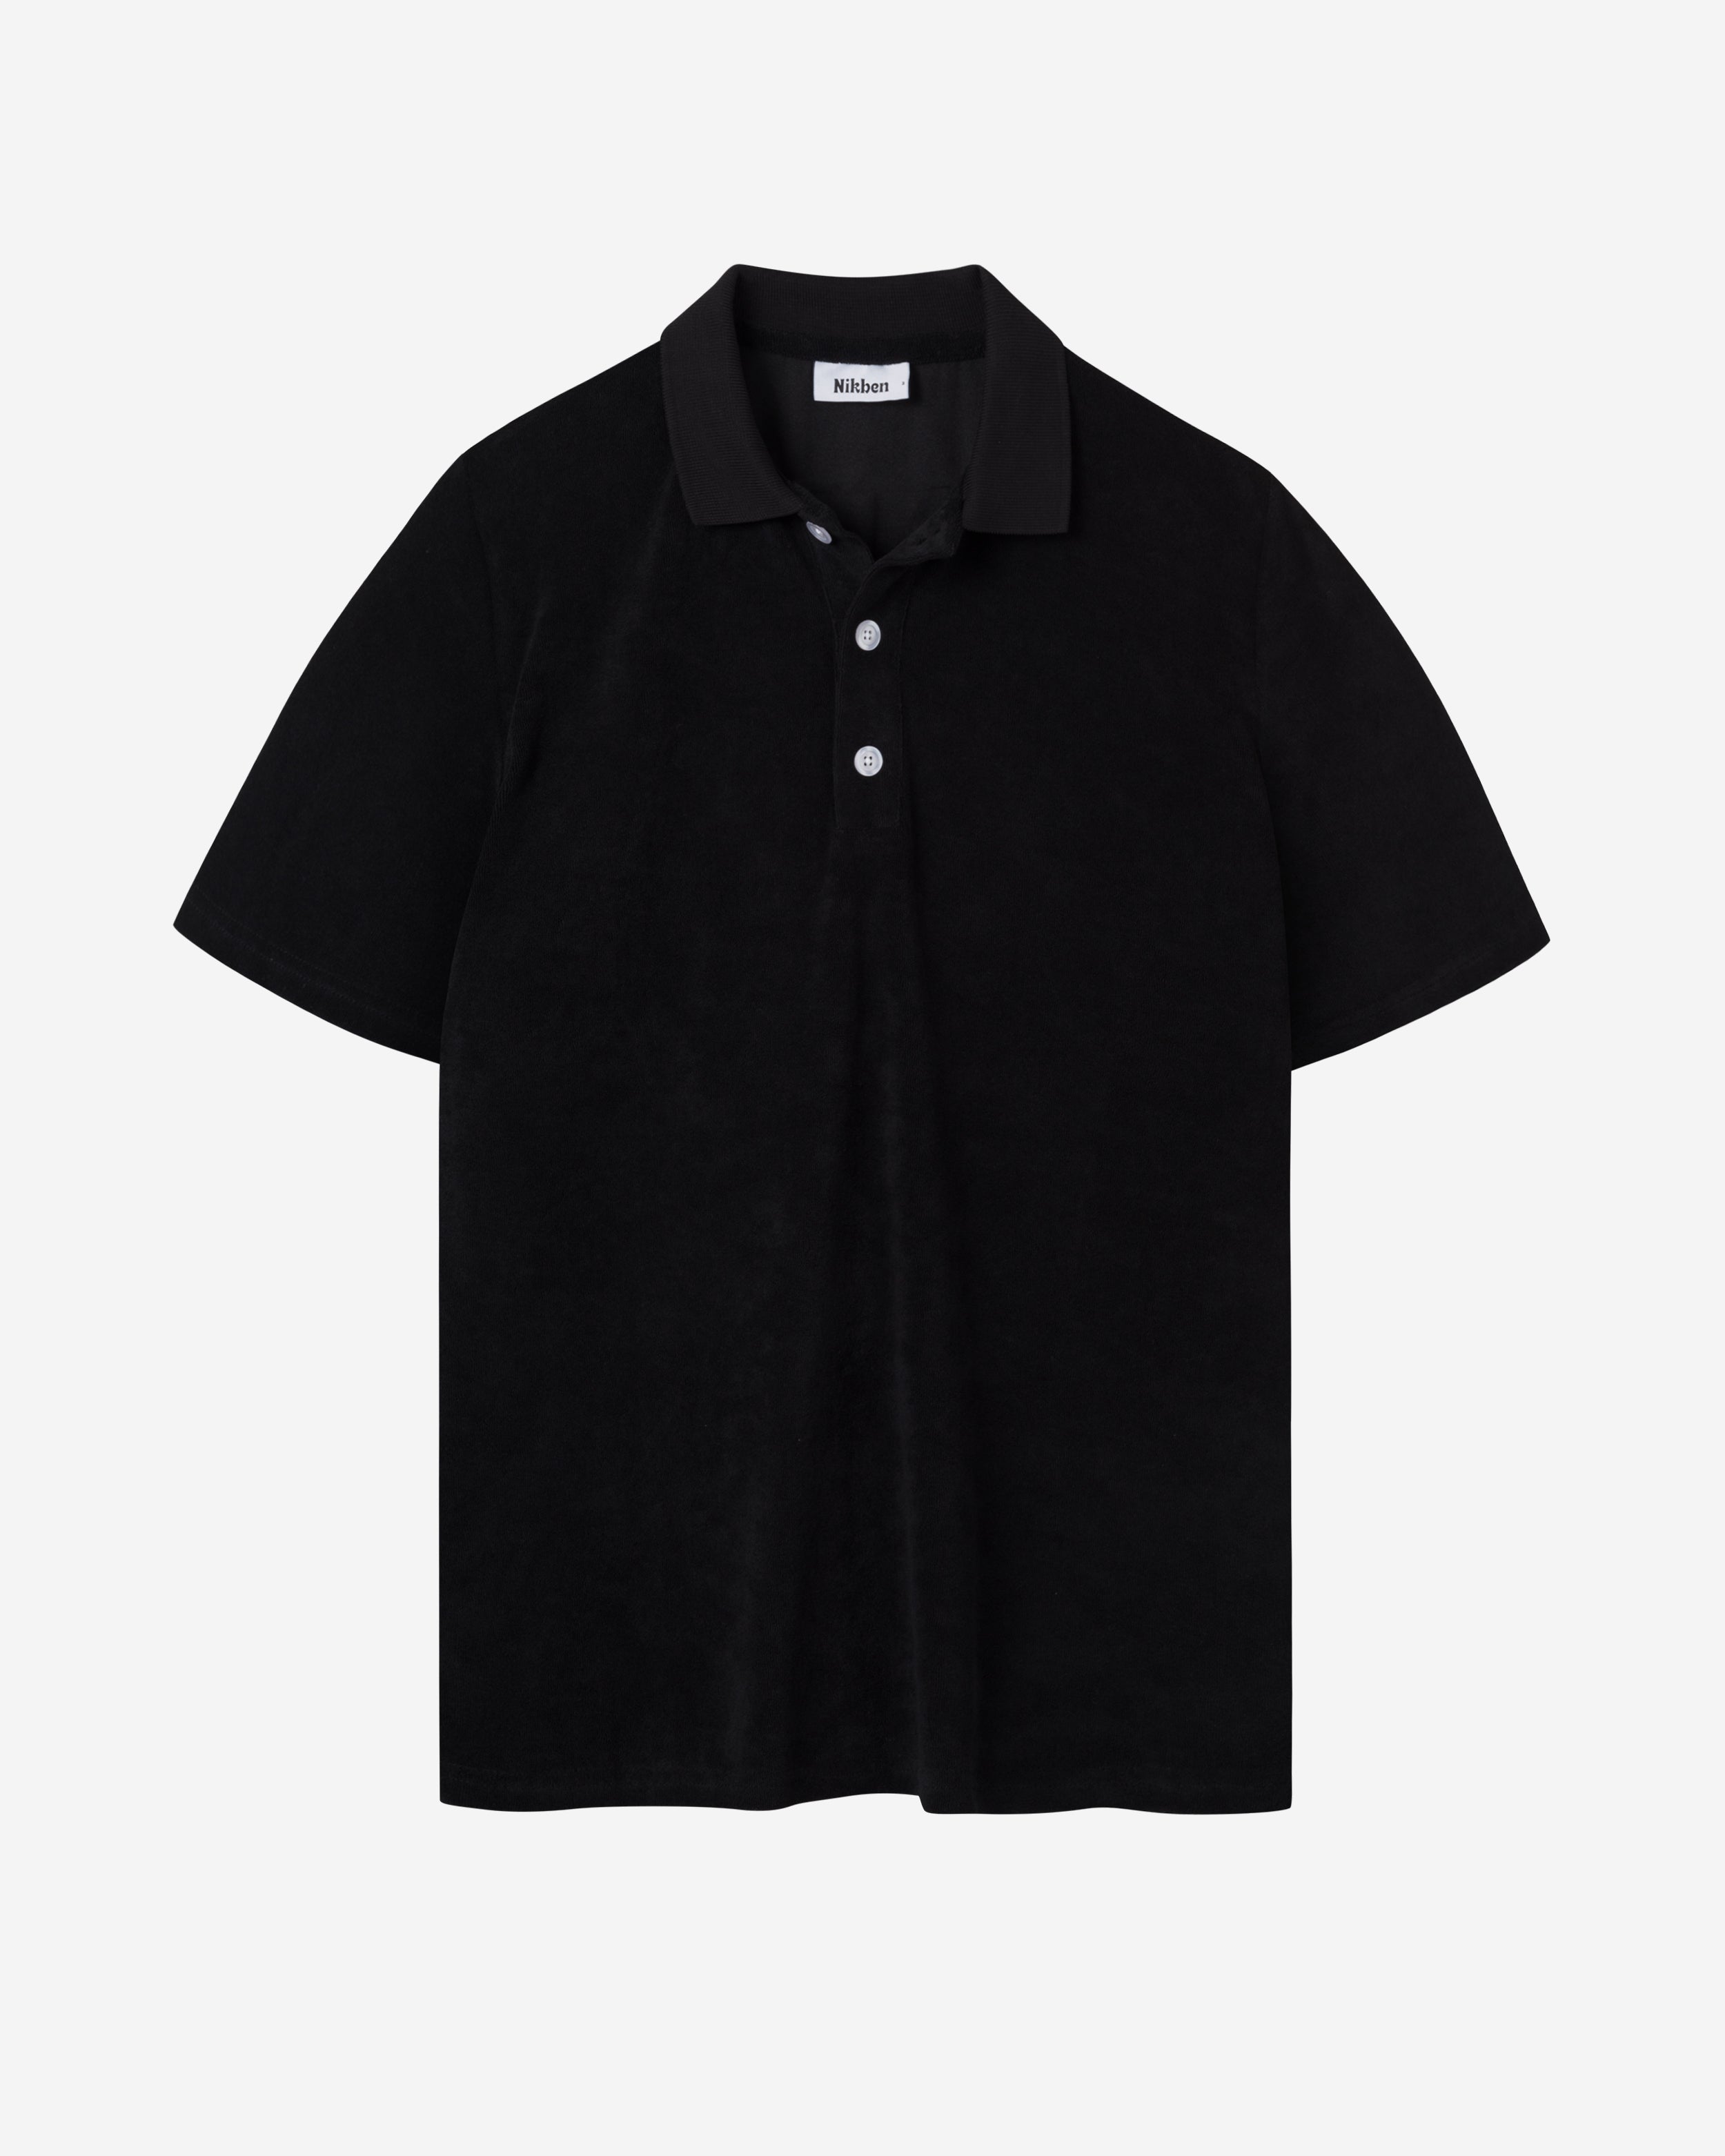 Black short sleeve piké shirt in terry toweling fabric.